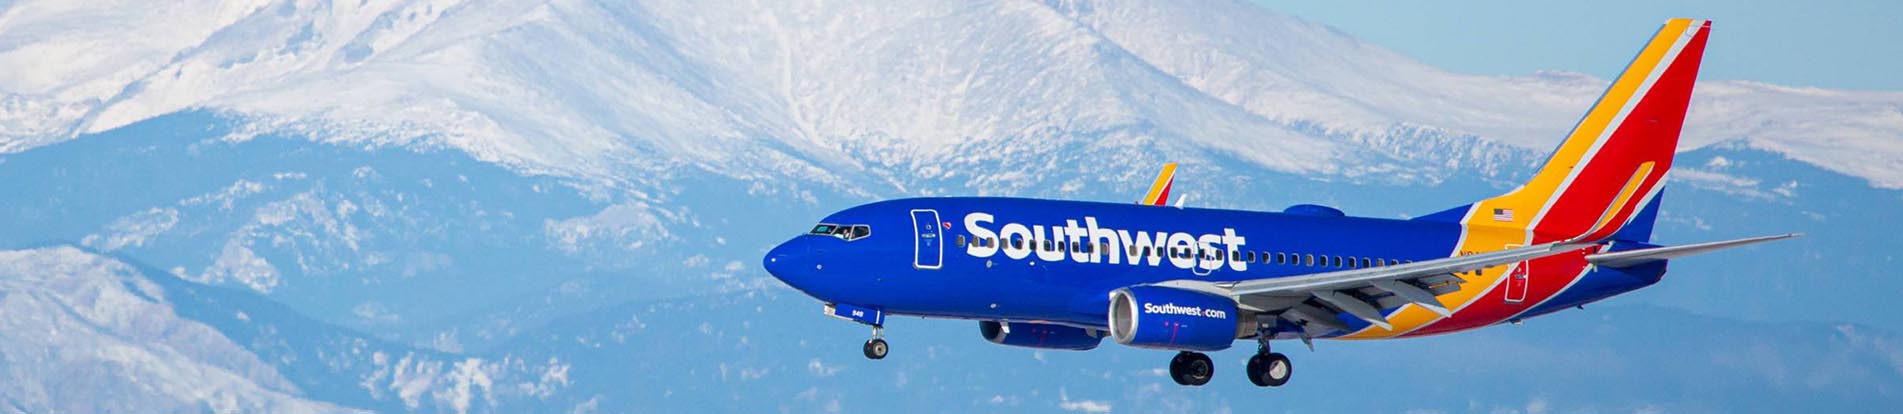 How to Get Southwest Airlines Flight Tickets?